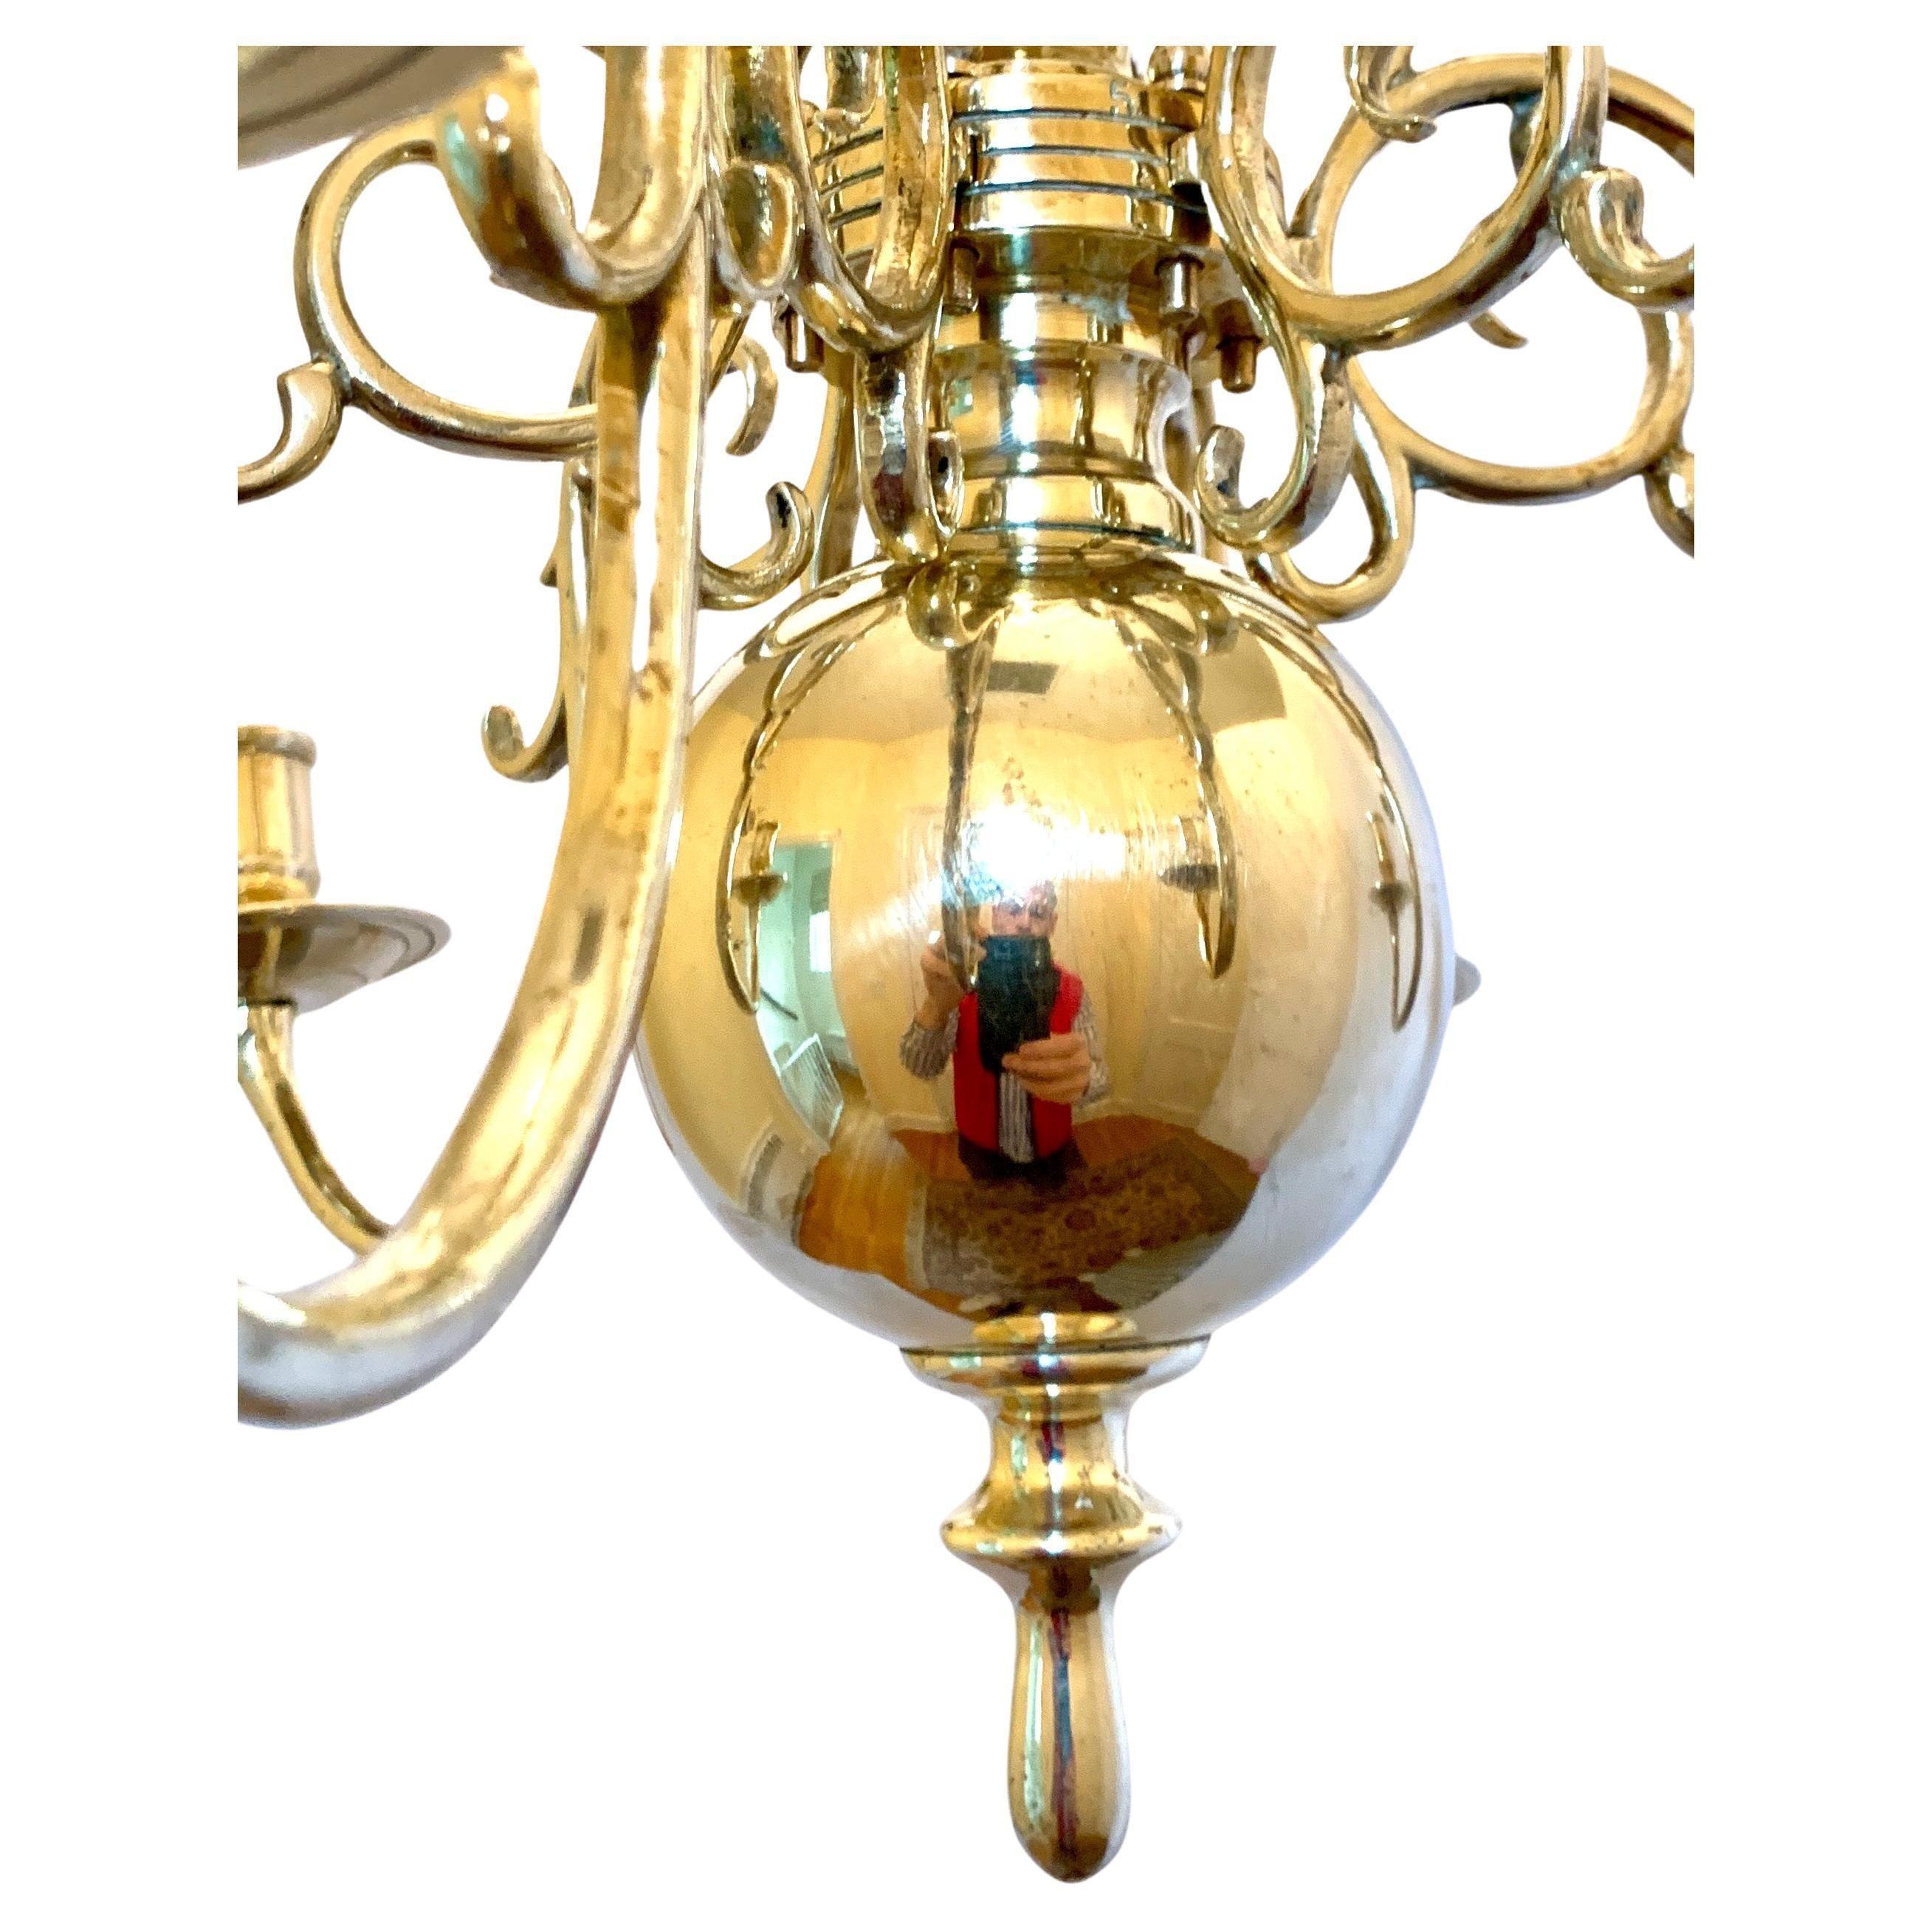 This Dutch brass six-arm chandelier was made in the 19th century.
It has scrolling mounted branches from a knopped column terminating in a large ball and ring at each end.
Deeply curved arms hold the candles at a level near the chandelier's